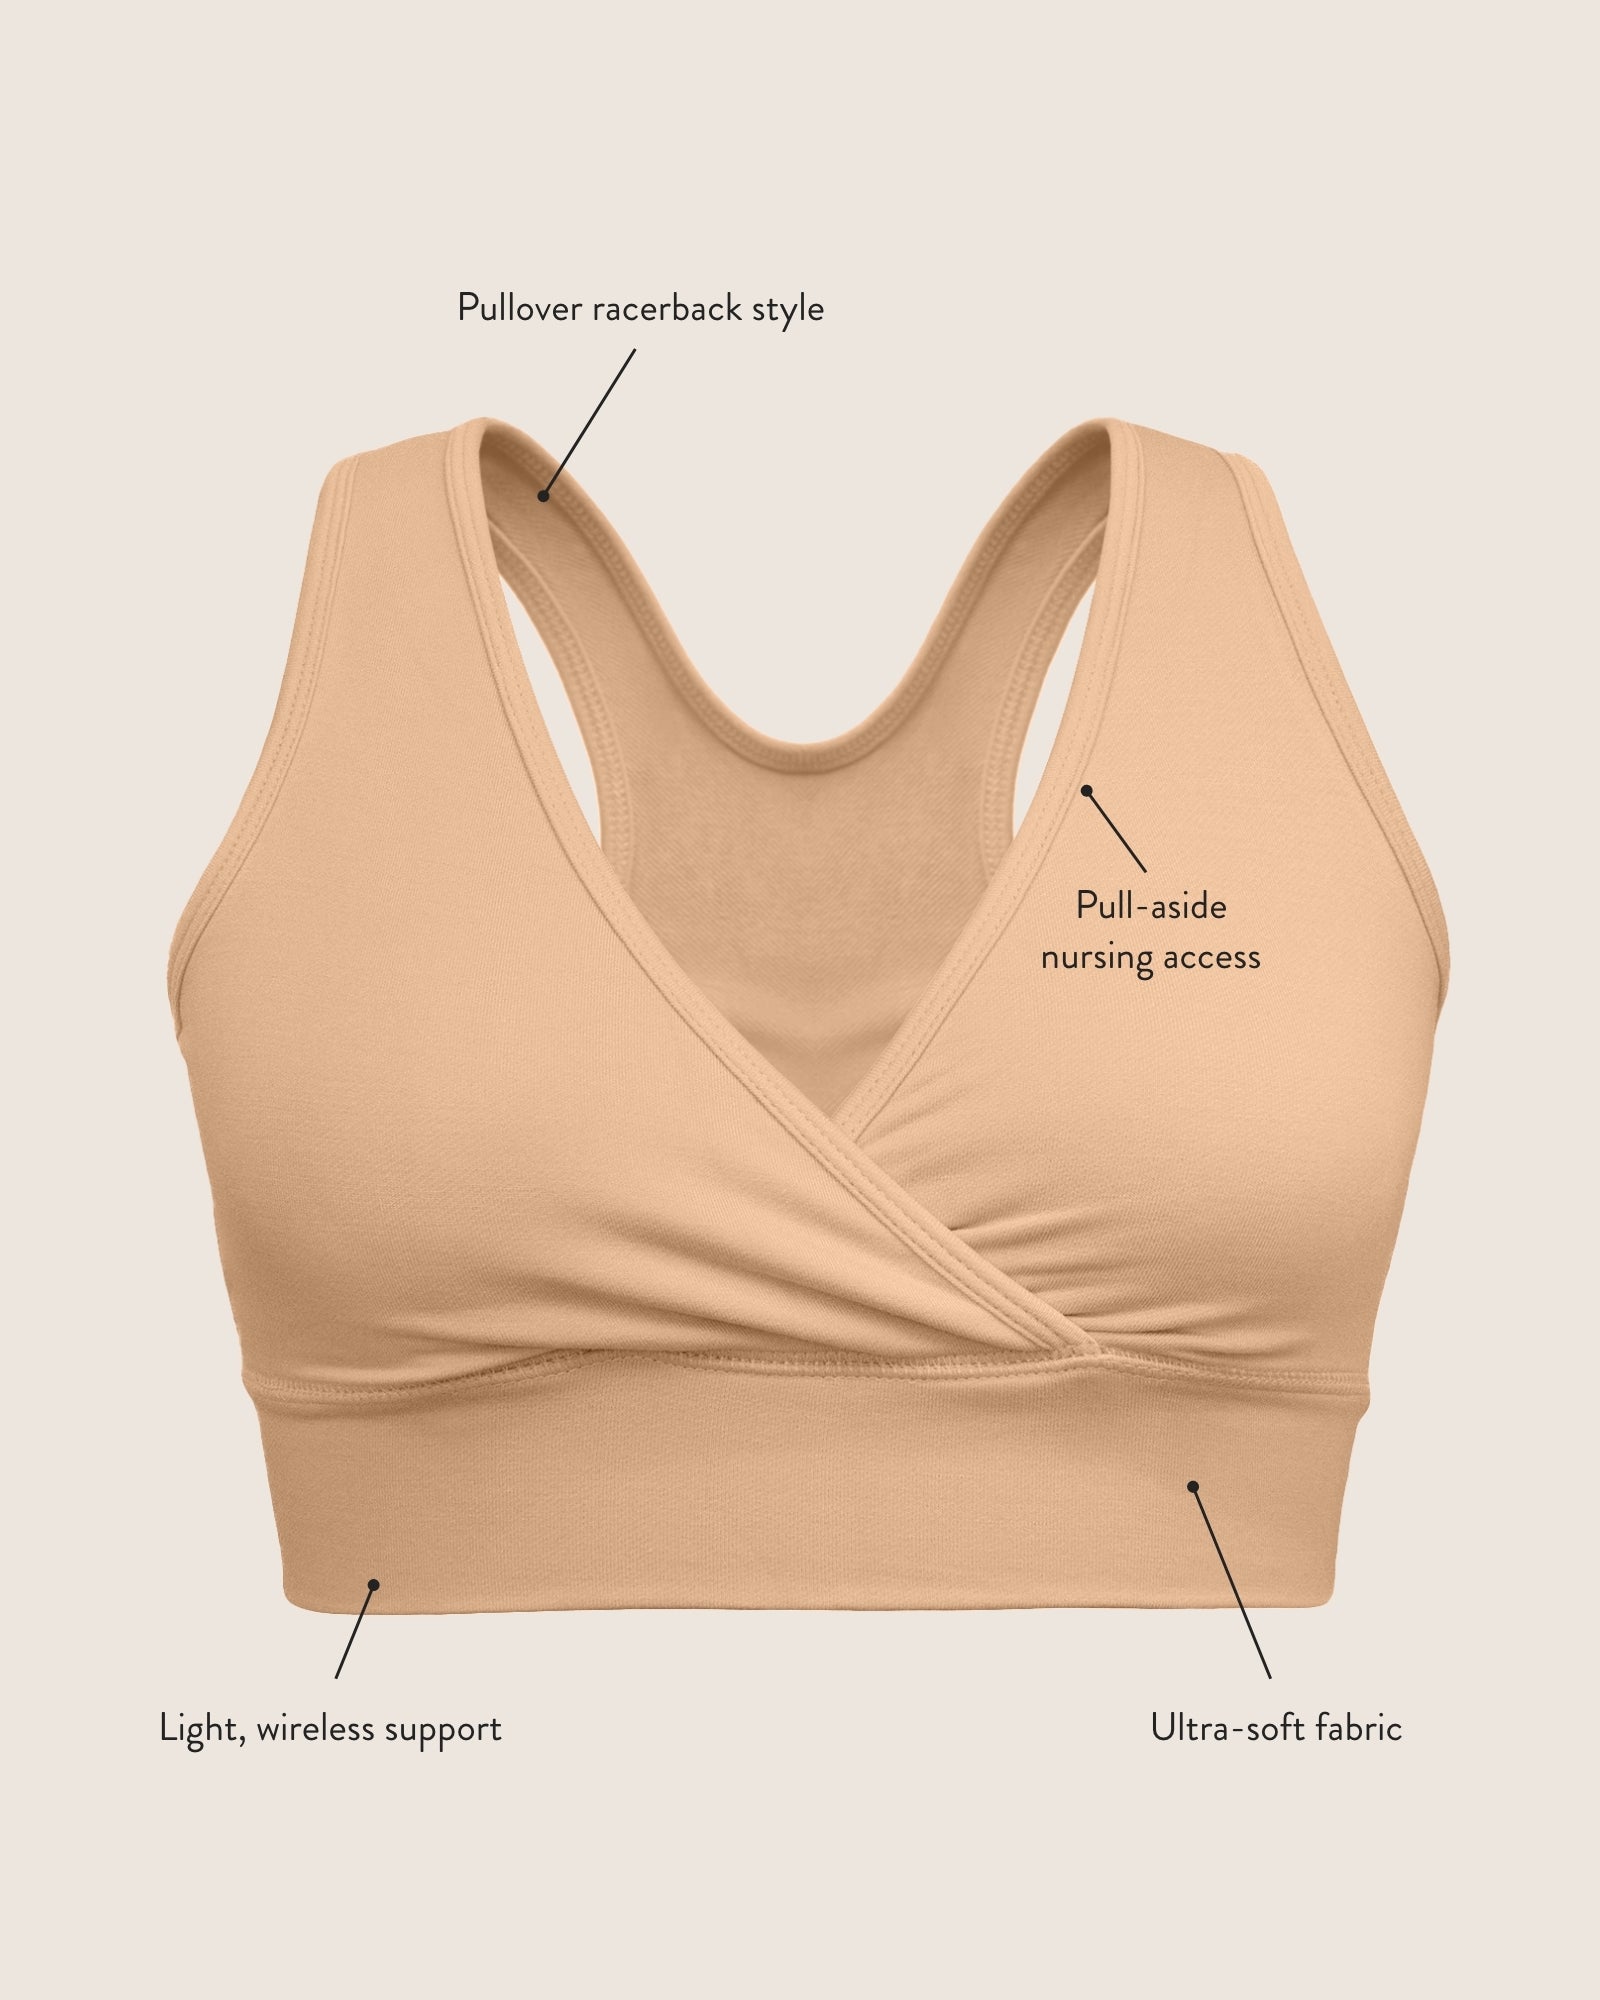 Infographic highlighting the benefits of the French Terry Nursing bra like the Pull-aside nursing access, wireless support and ultra-soft fabric.